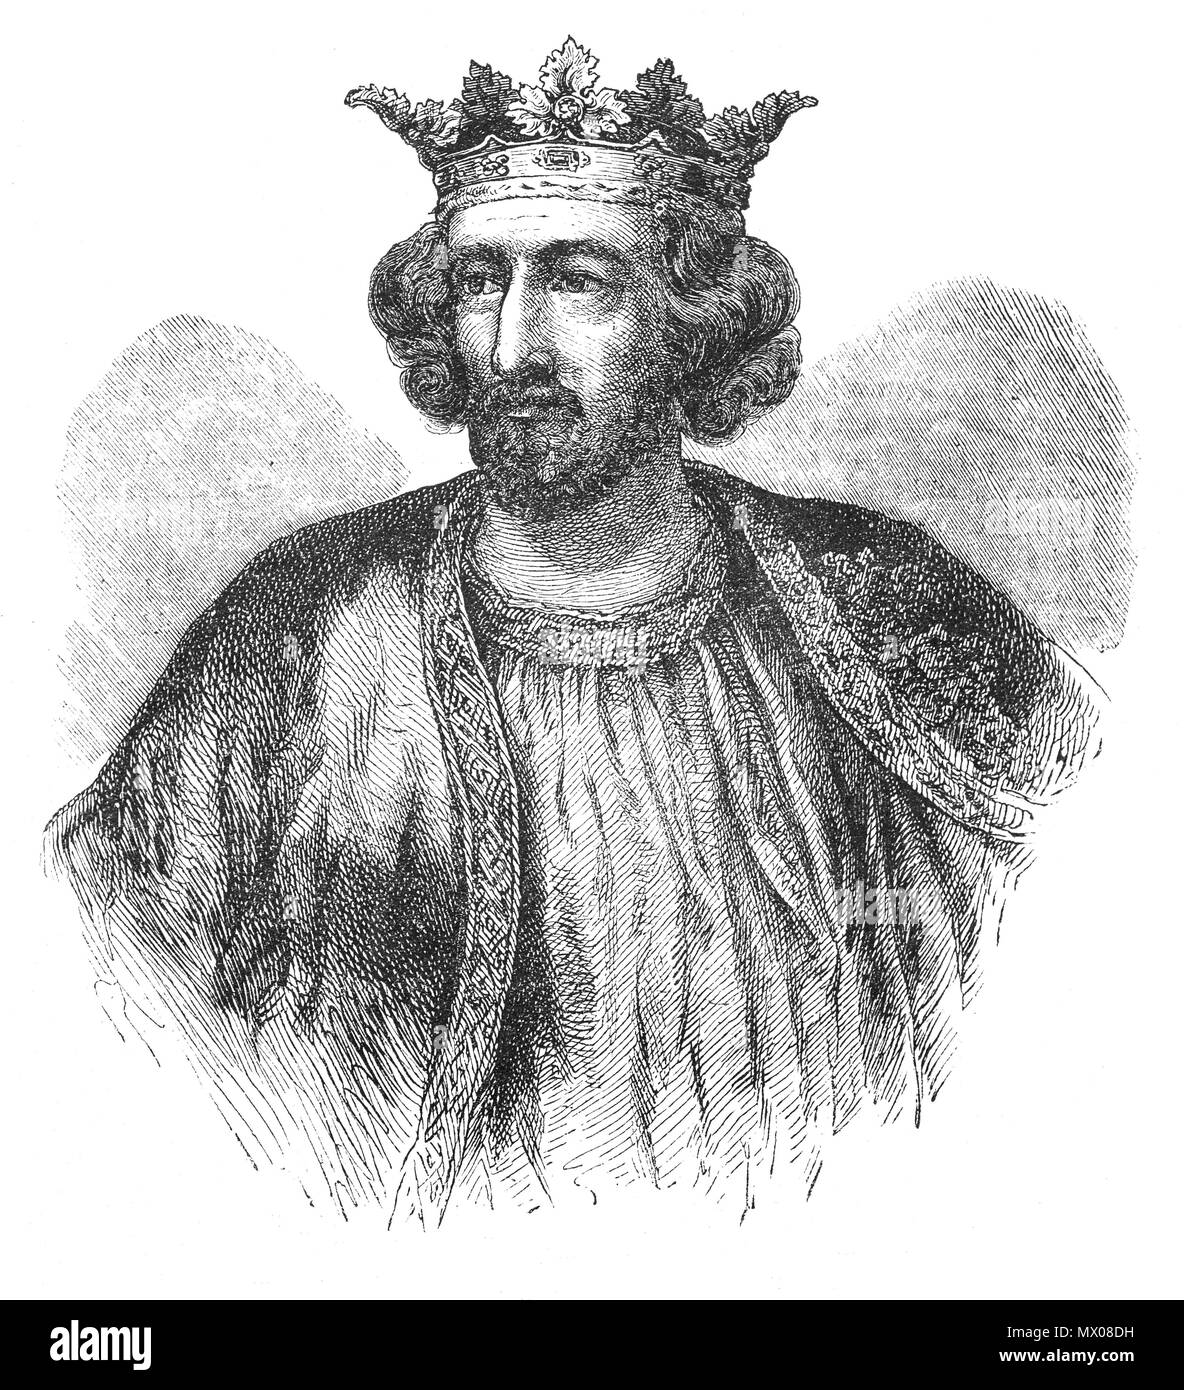 A portrait of King Edward I (1239–1307), aka Edward Longshanks, King of England from 1272 to 1307. He spent much of his reign reforming royal administration and common law. Through an extensive legal inquiry, Edward investigated the tenure of various feudal liberties, while the law was reformed through a series of statutes regulating criminal and property law.  Edward joined the Ninth Crusade to the Holy Land, but returned home in 1272 when he was informed that his father had died. He reached England in 1274 and was crowned at Westminster on 19 August. Stock Photo